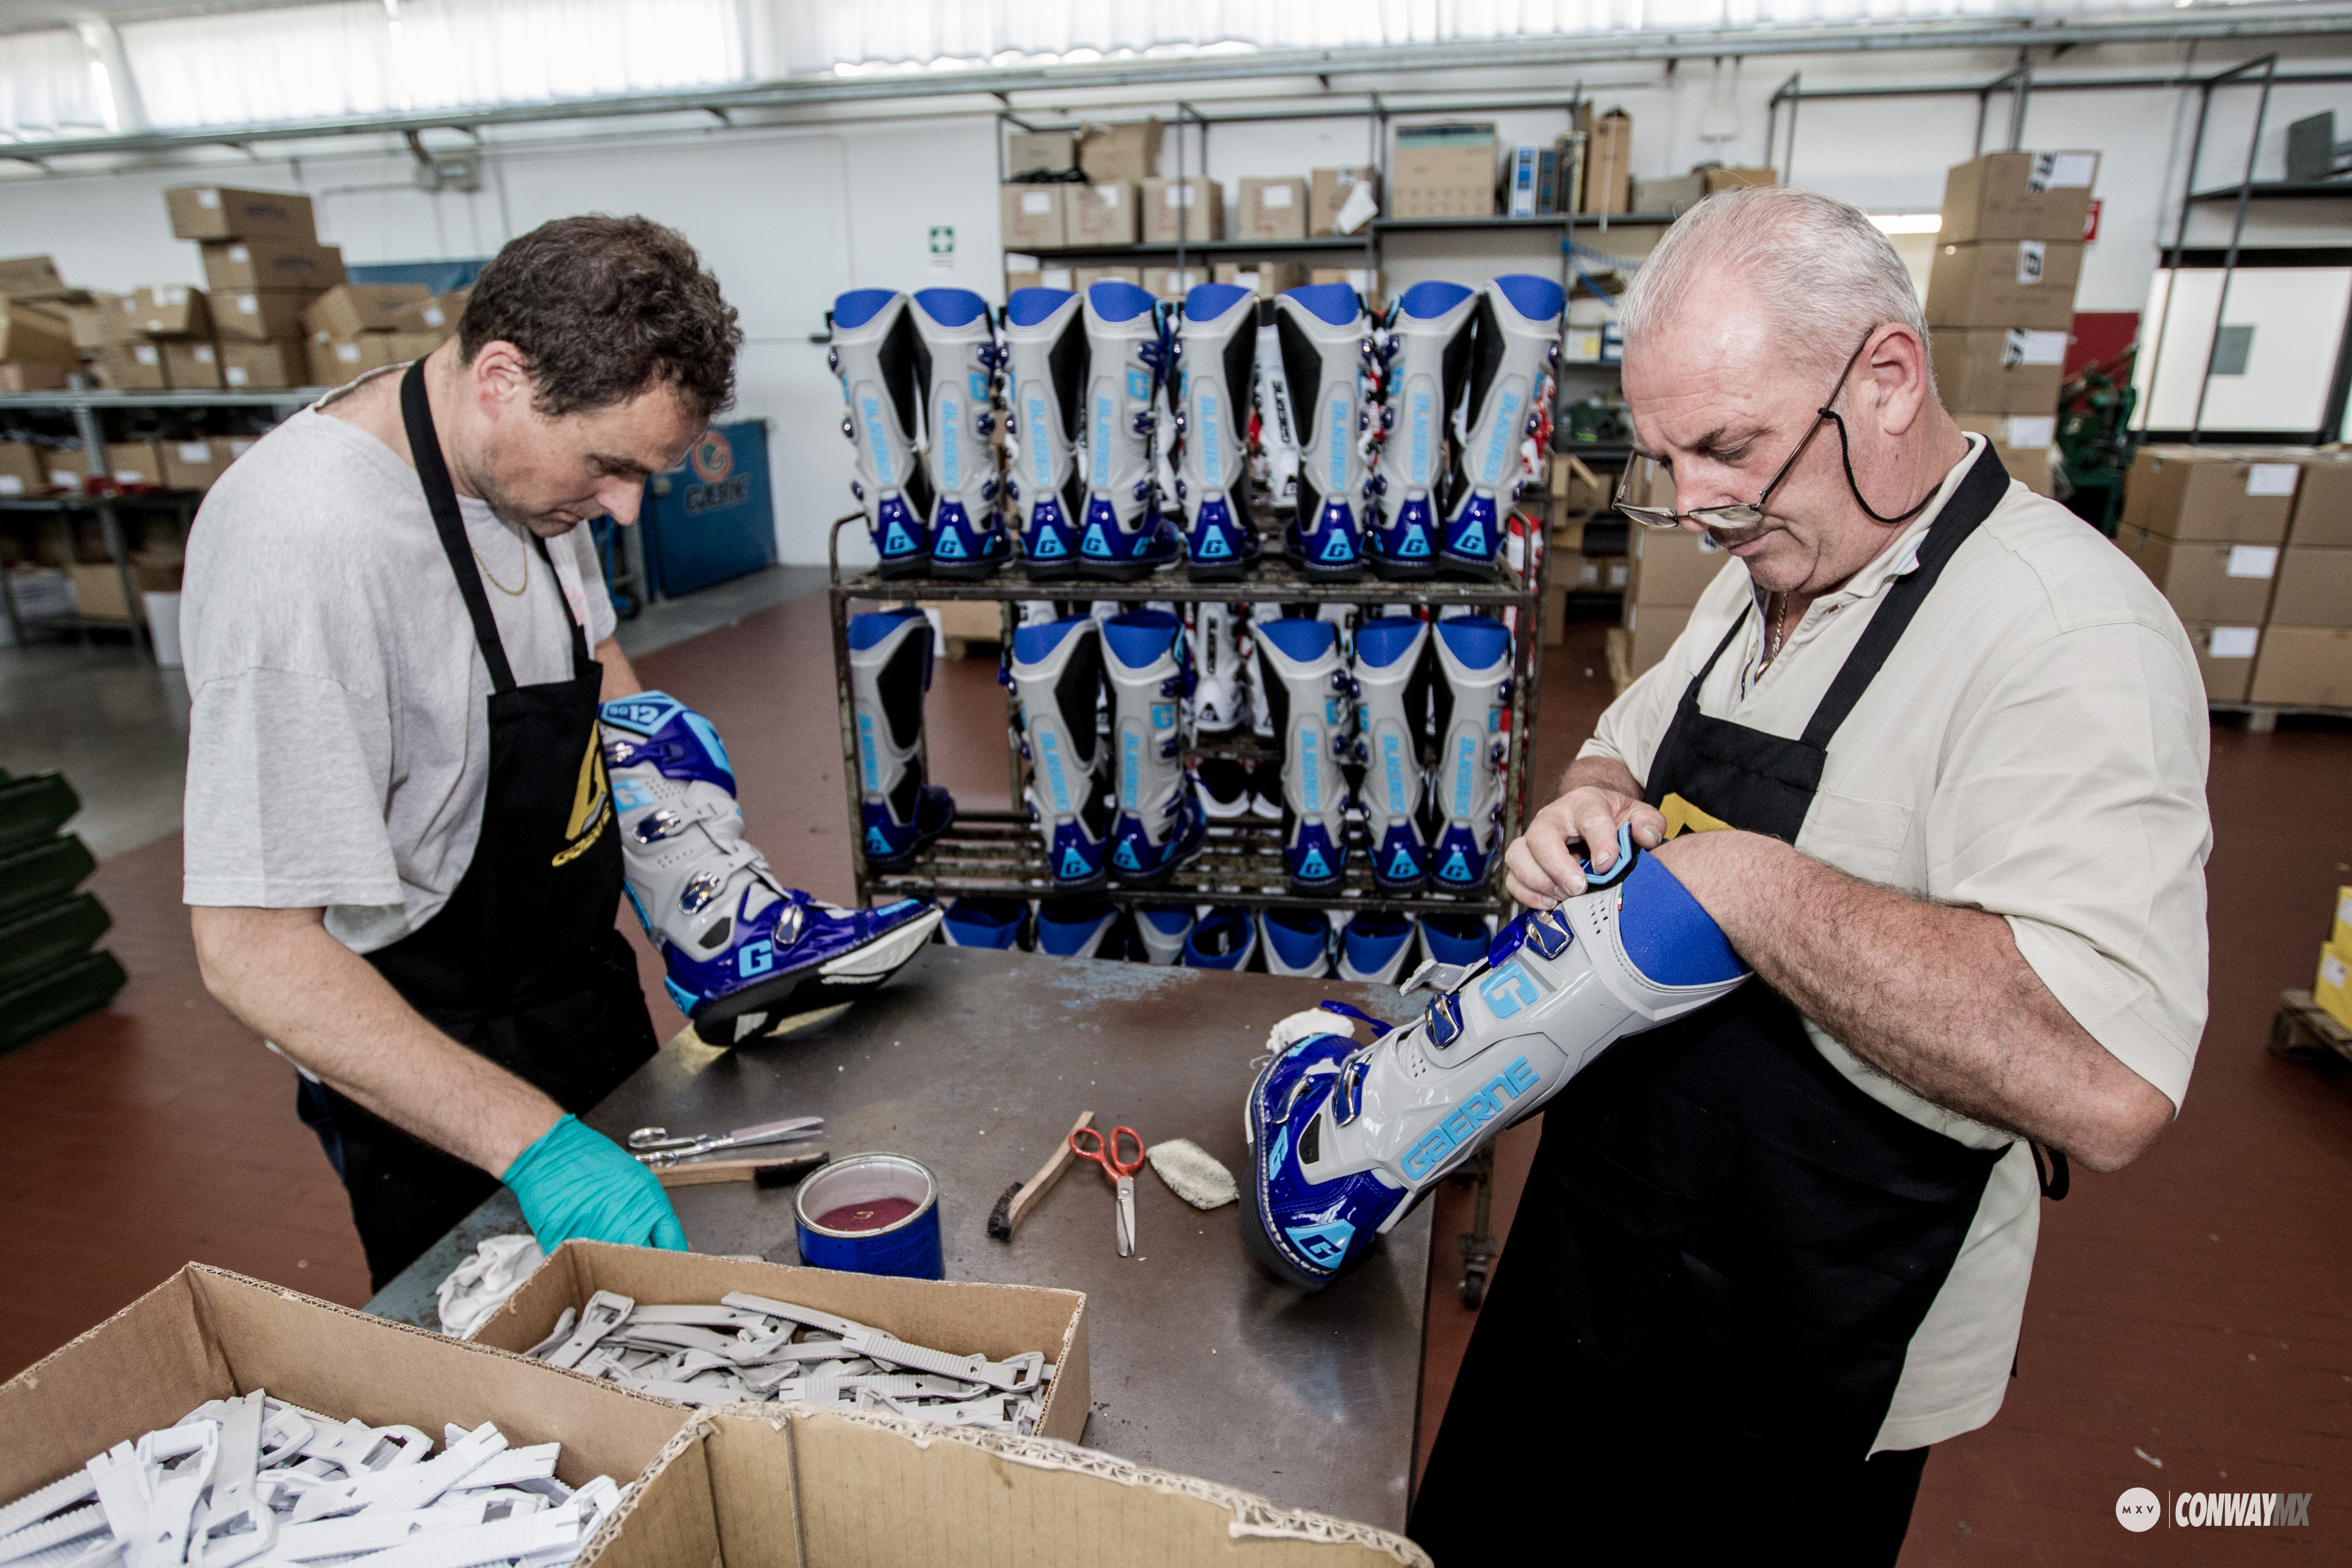 At this point the boots are thoroughly cleaned and inspected before the final boot straps are fitted.